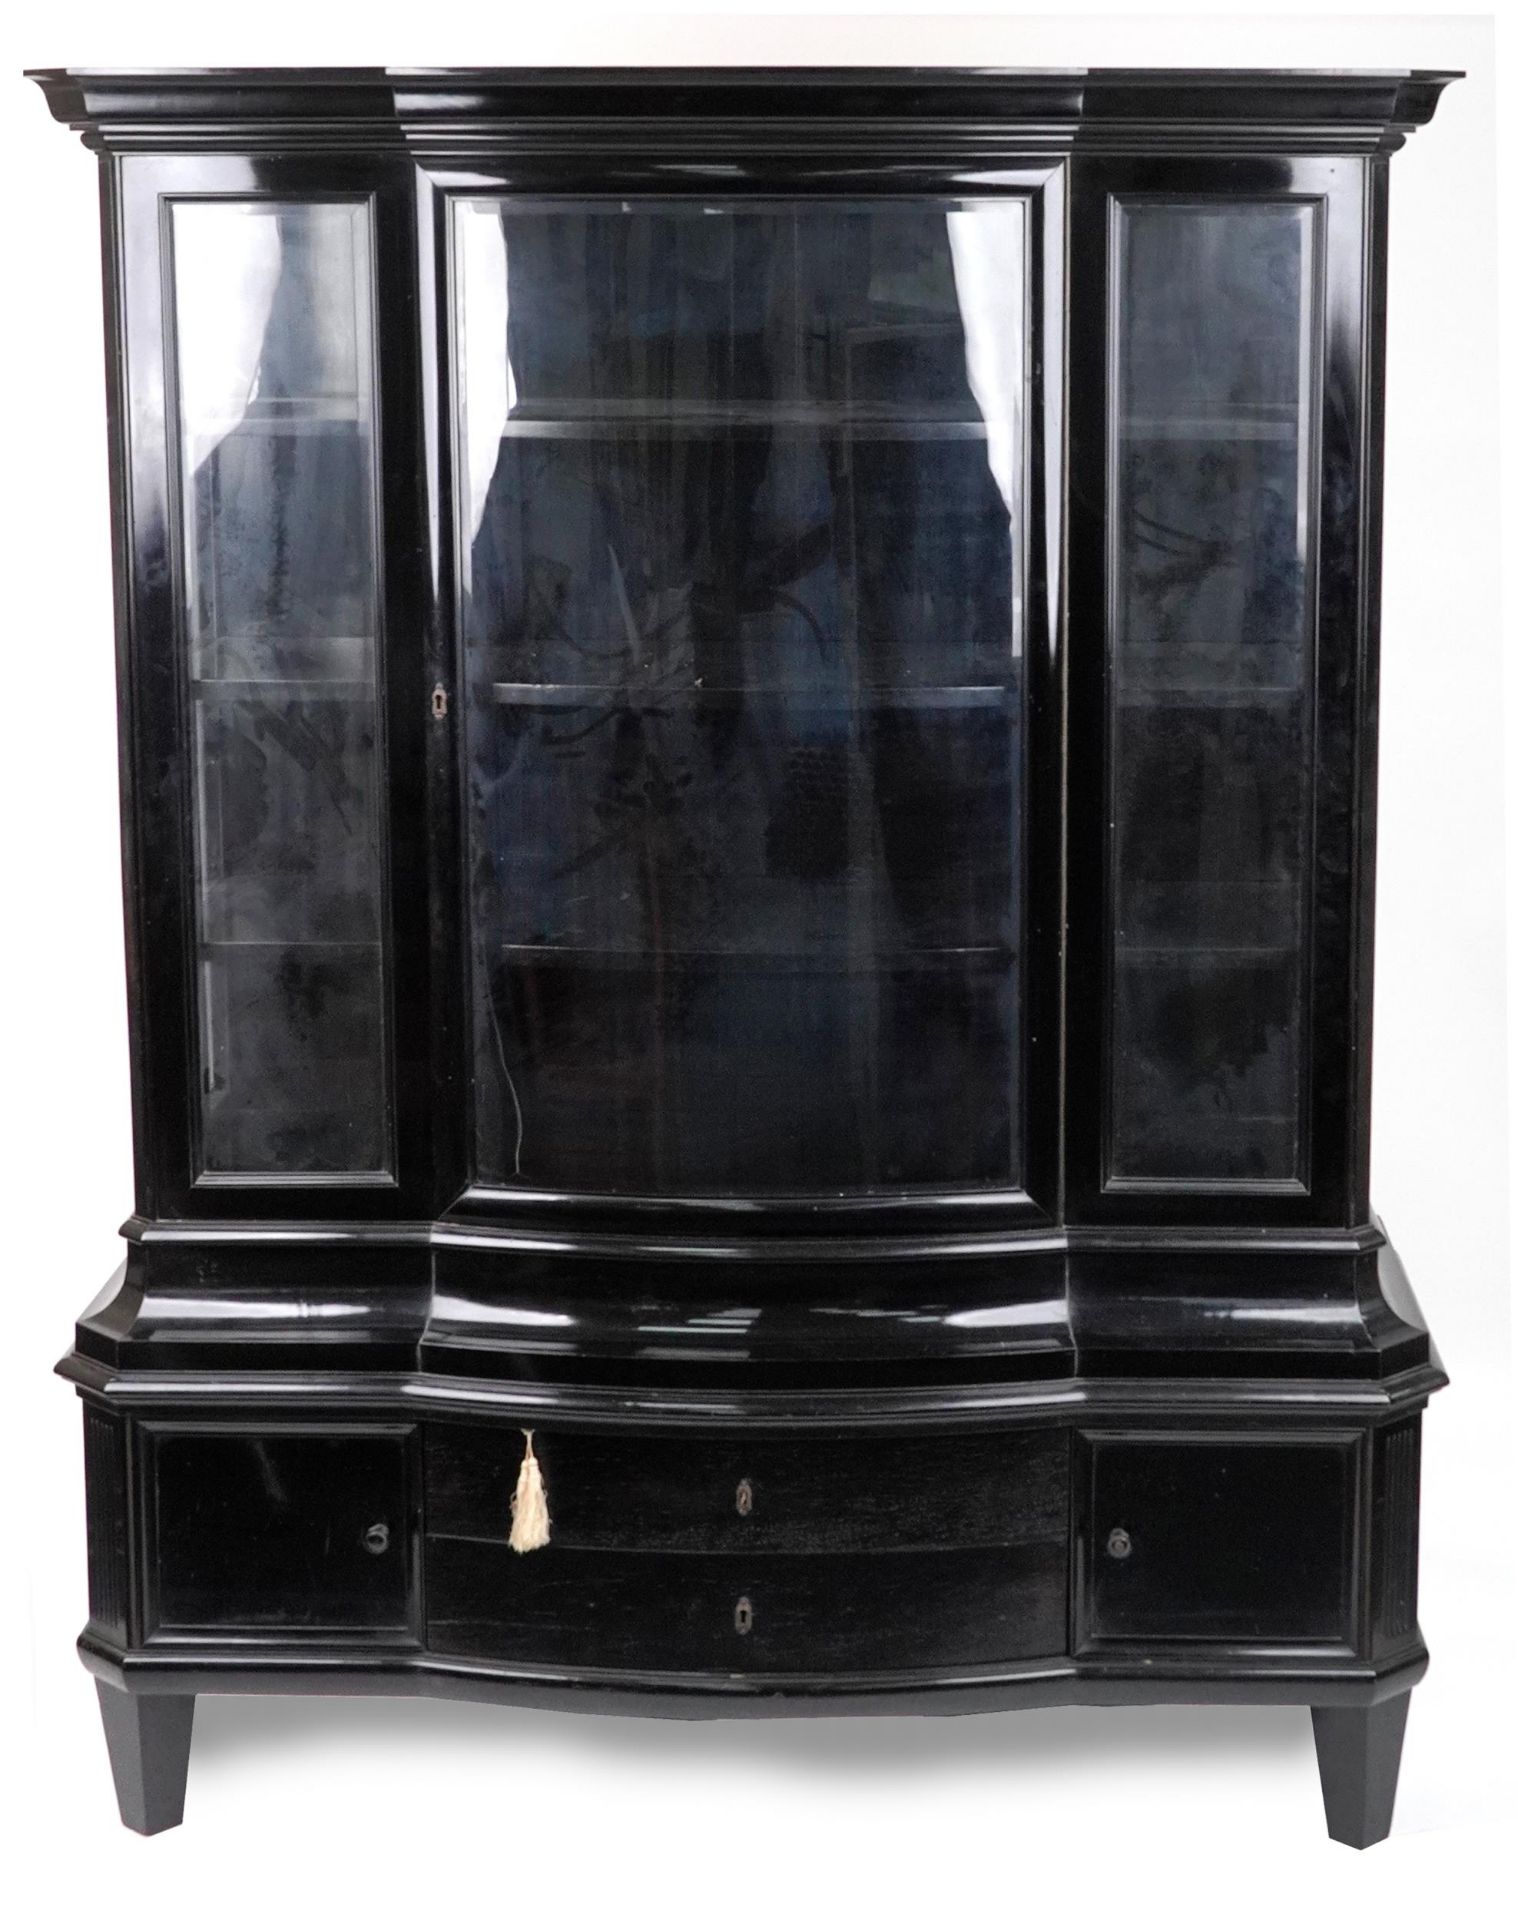 19th century European ebonised bow front display cabinet with bevelled glass panels, on tapering